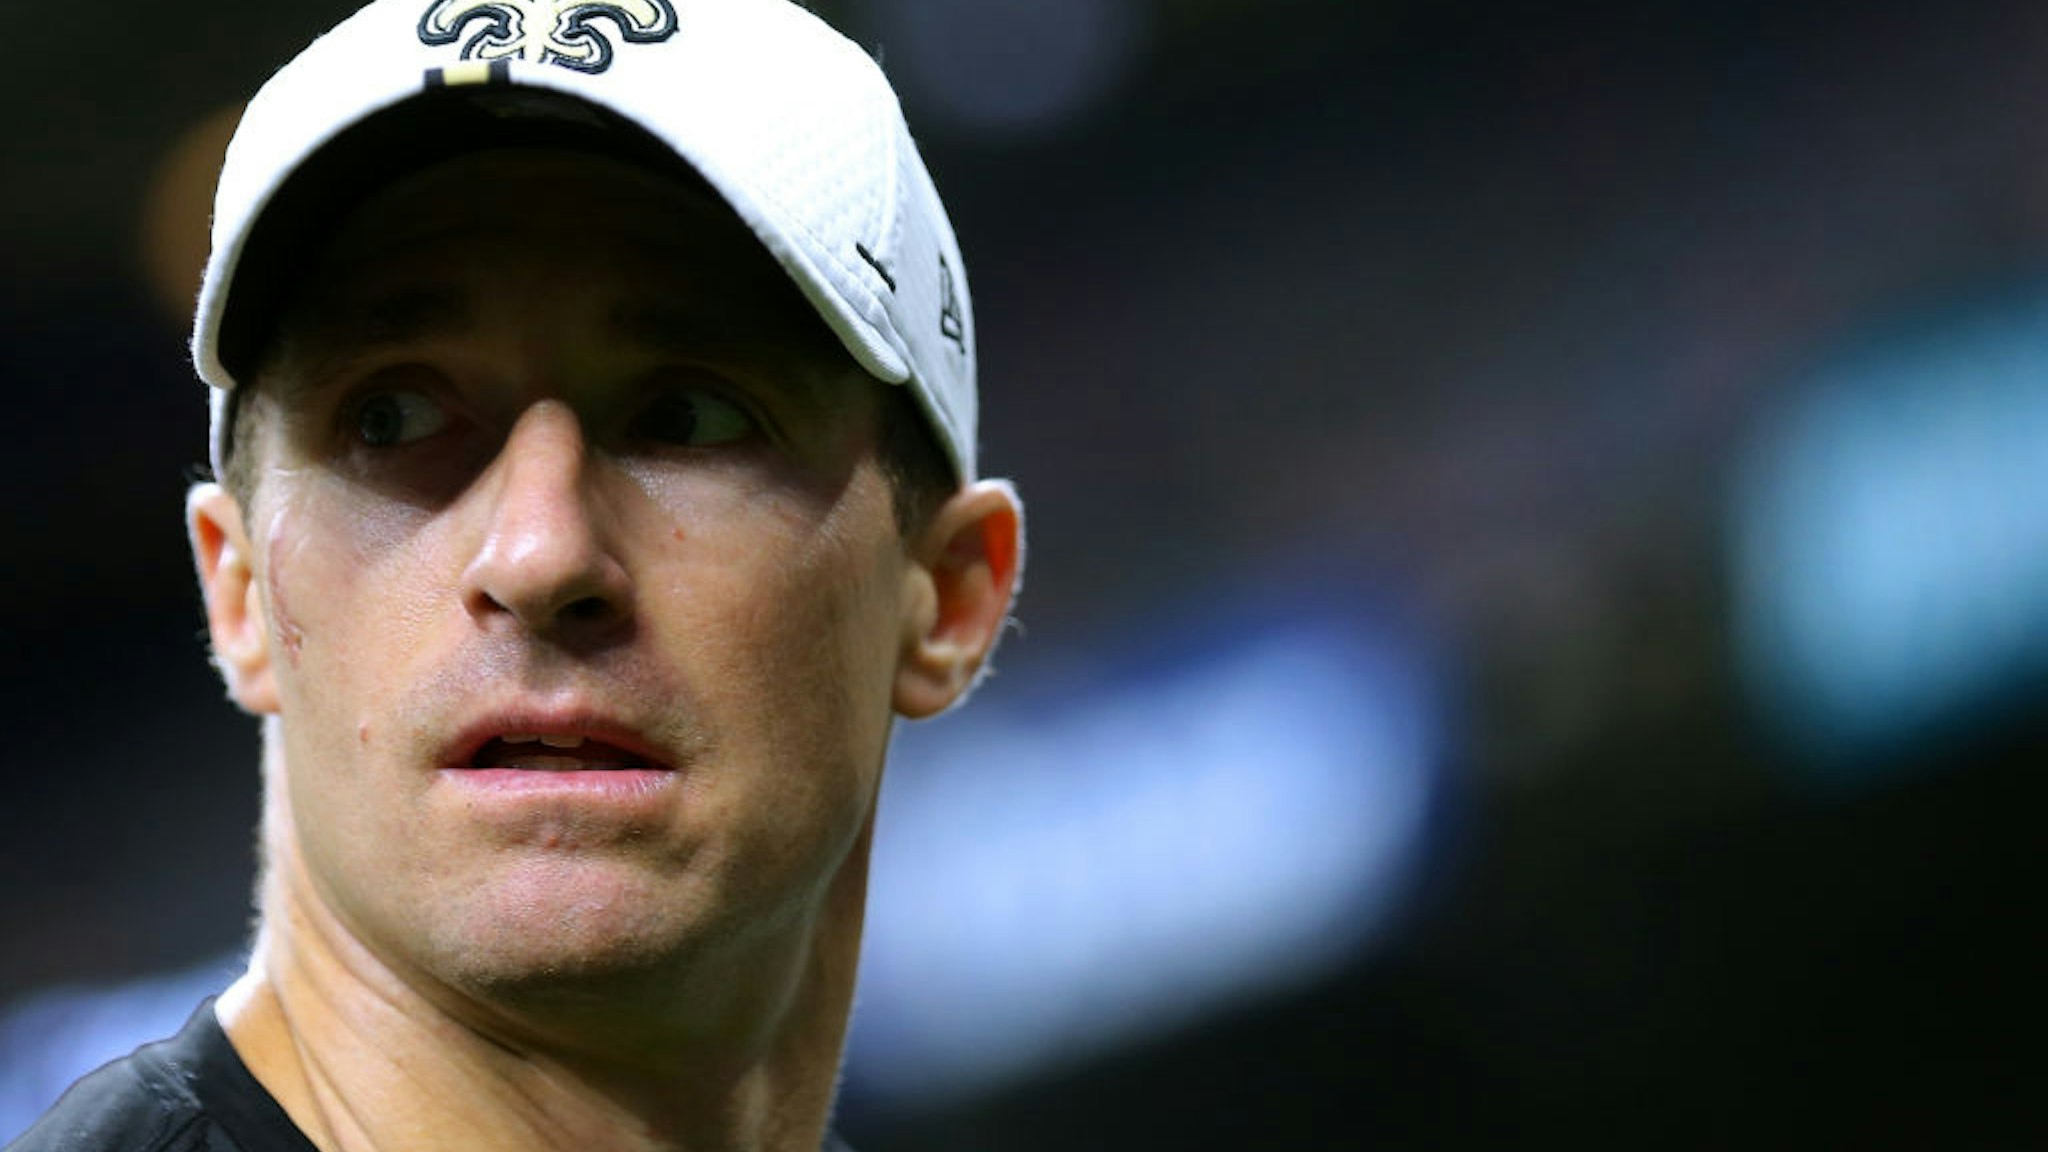 Drew Brees #9 of the New Orleans Saints during a preseason game at the Mercedes Benz Superdome on August 09, 2019 in New Orleans, Louisiana.